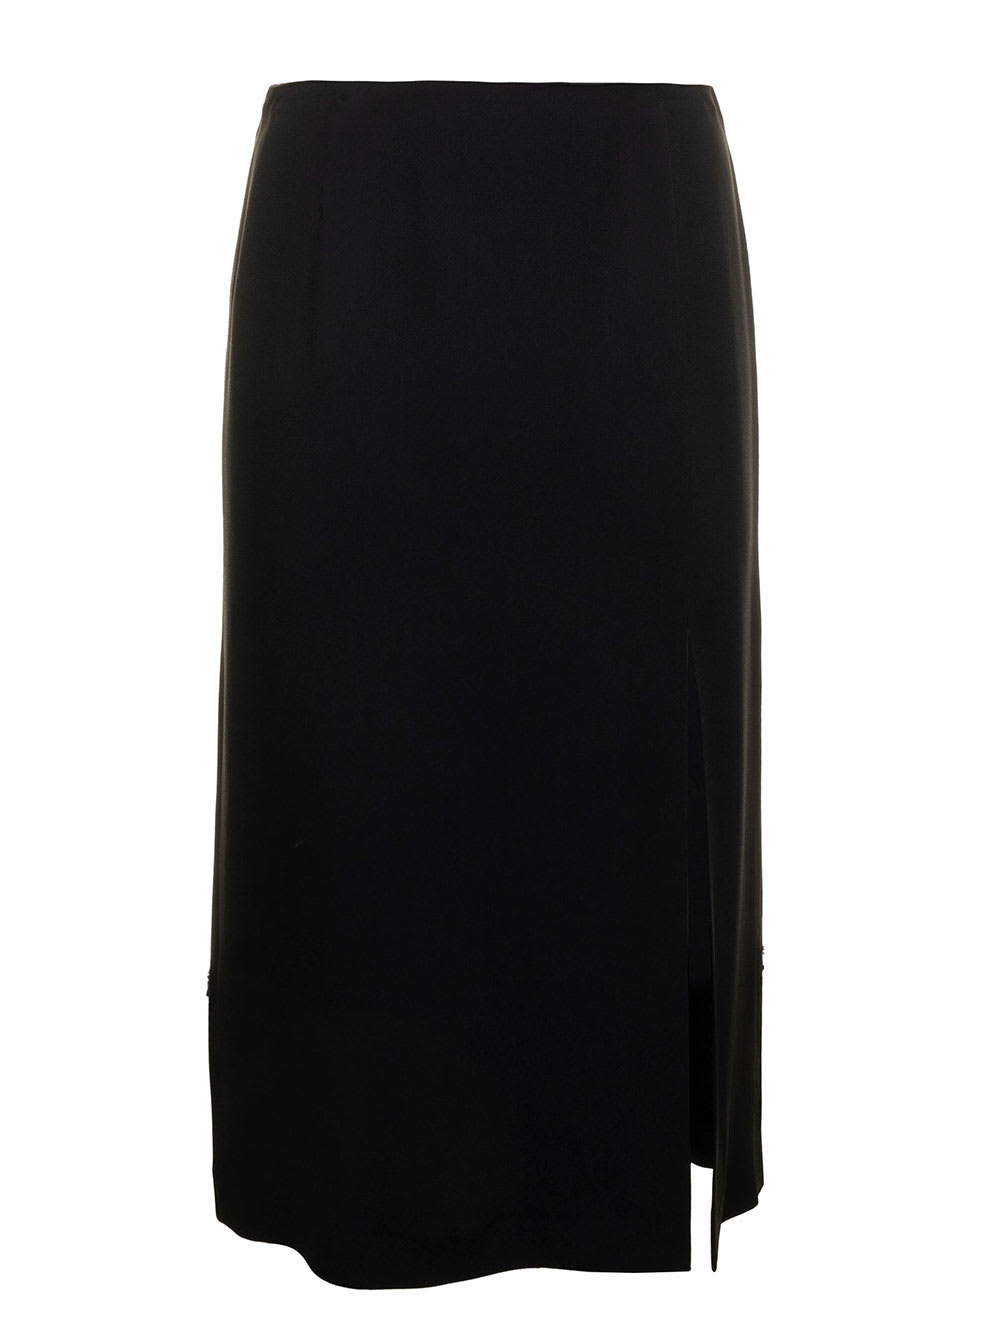 Red Valentino Womans Black Crepe Evers Satin Skirt